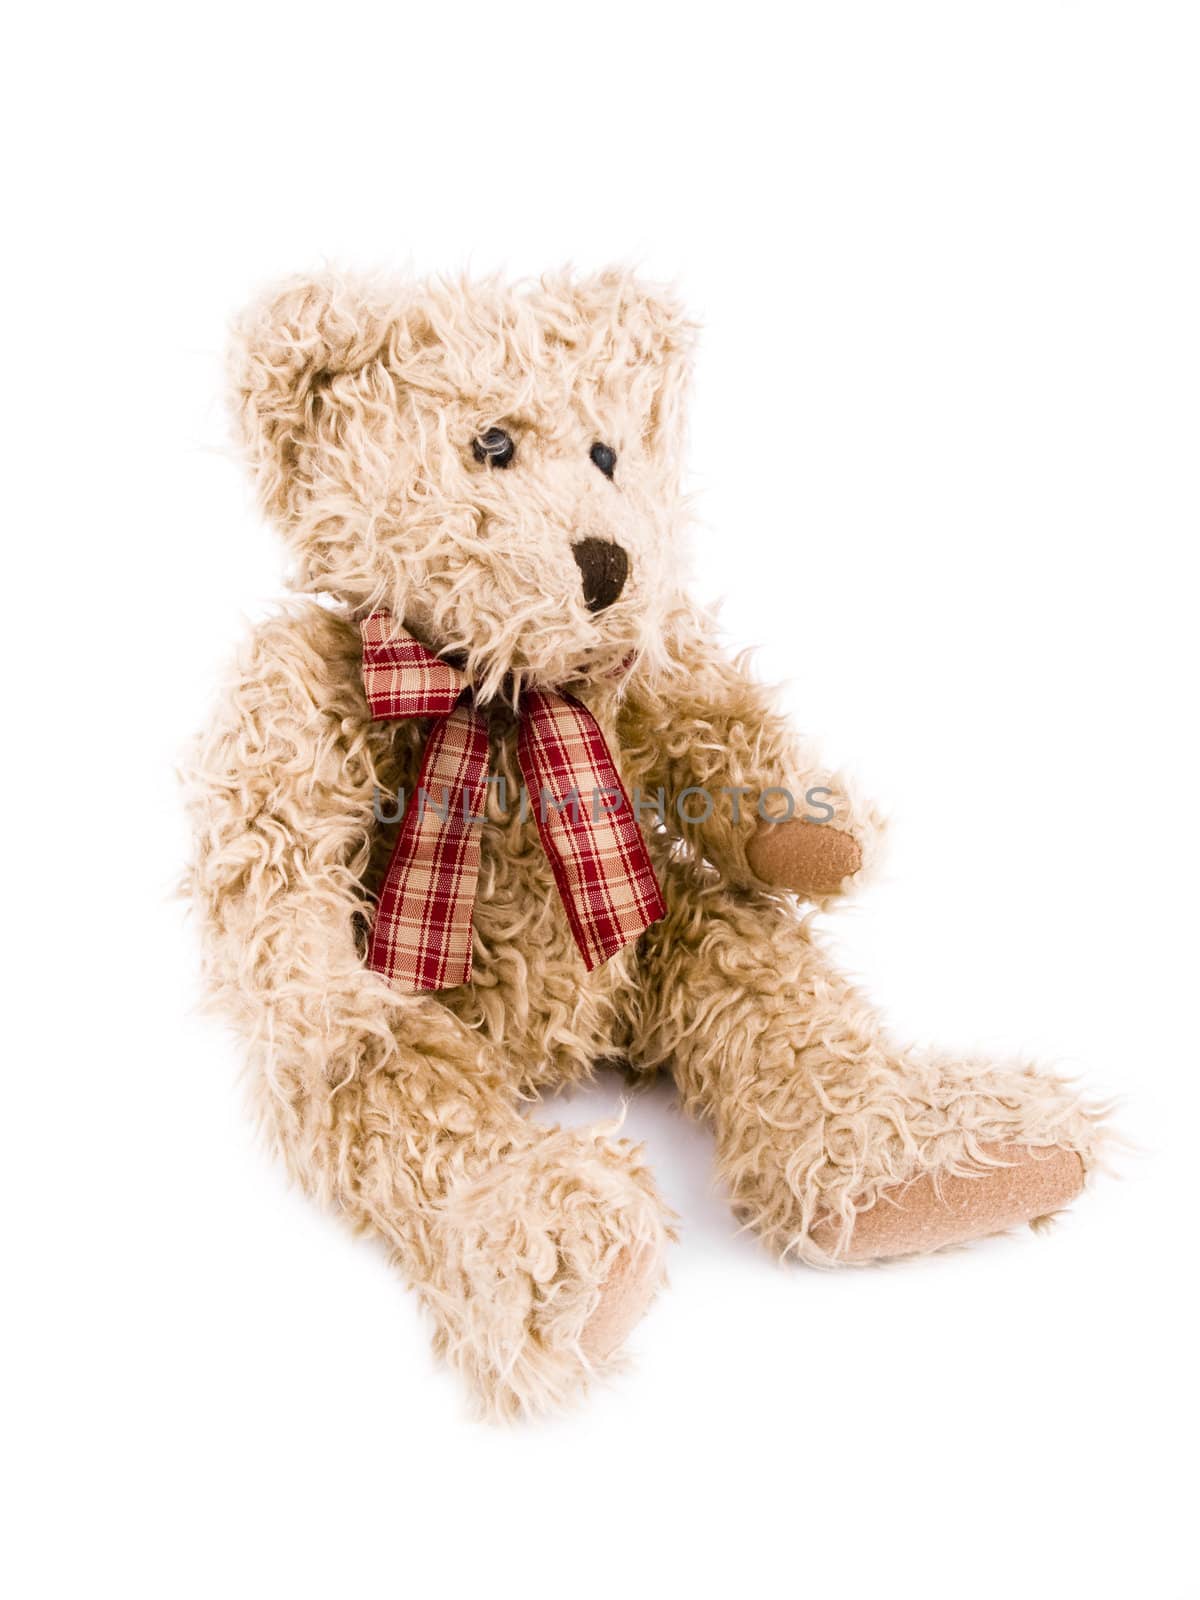 Brown teddy-bear on white background.